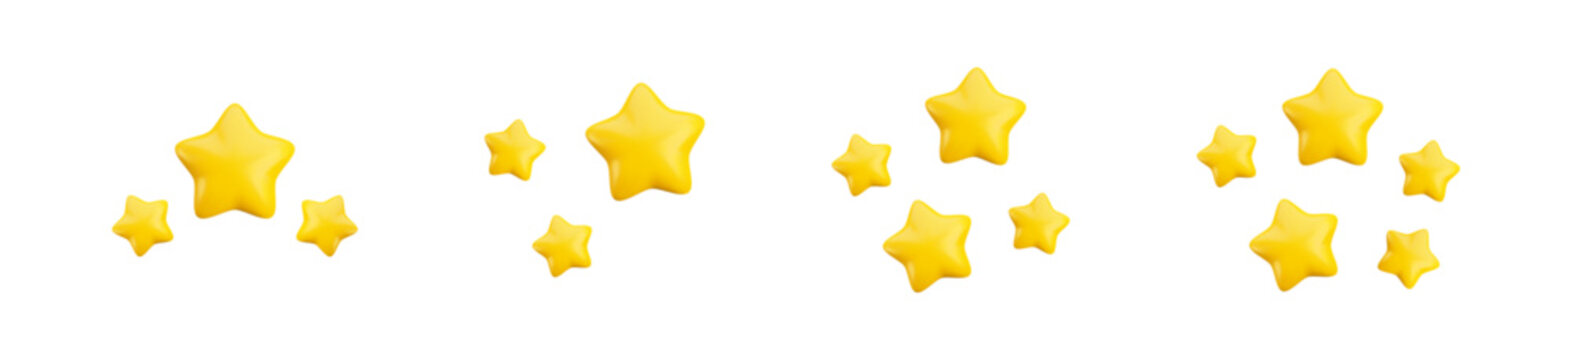 Vector cartoon 3d gold stars set collection. Realistic 3d render star set on white background. High quality rating symbol, magic game illustration, starry sky sign. For web, apps, advert, game design.